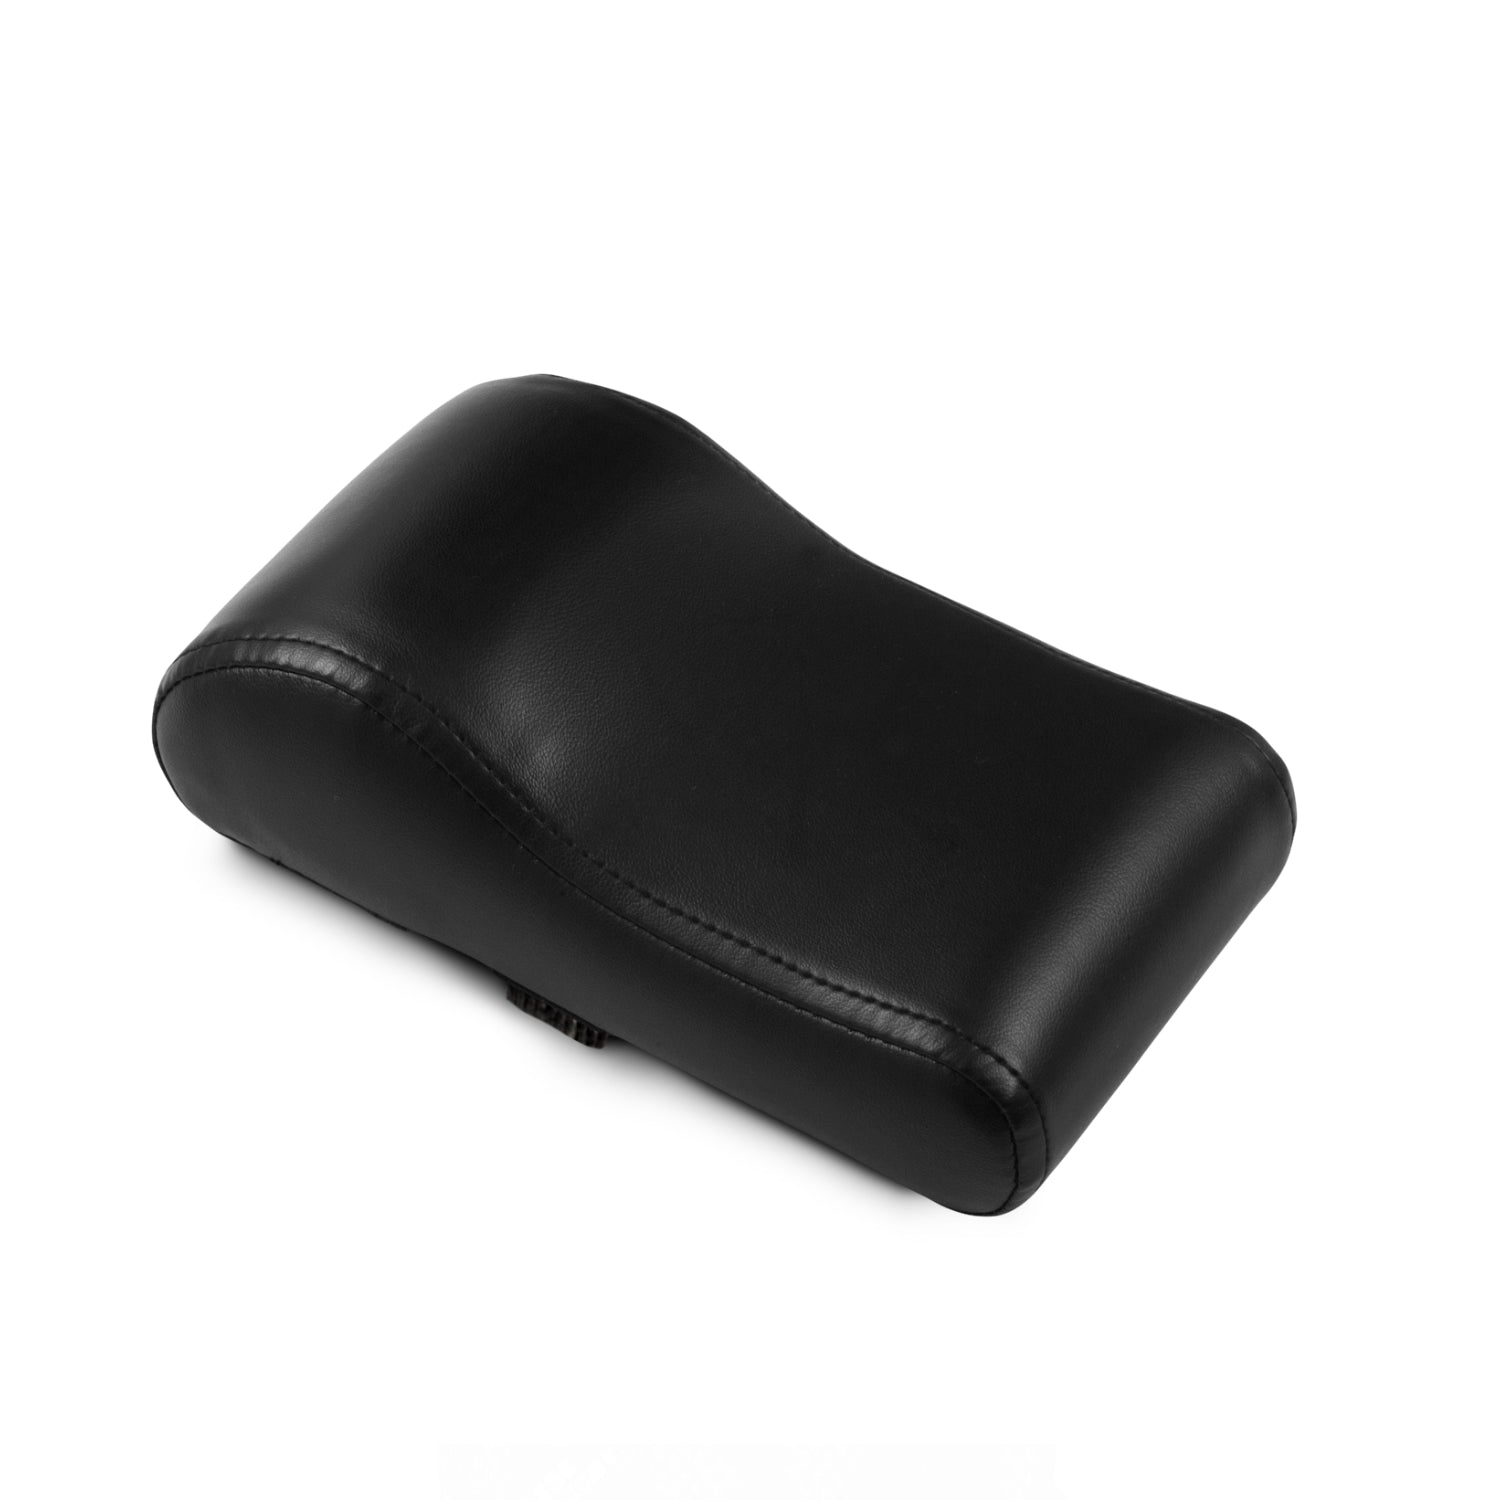 Reformer Pilates Head and Neck Support Cushion